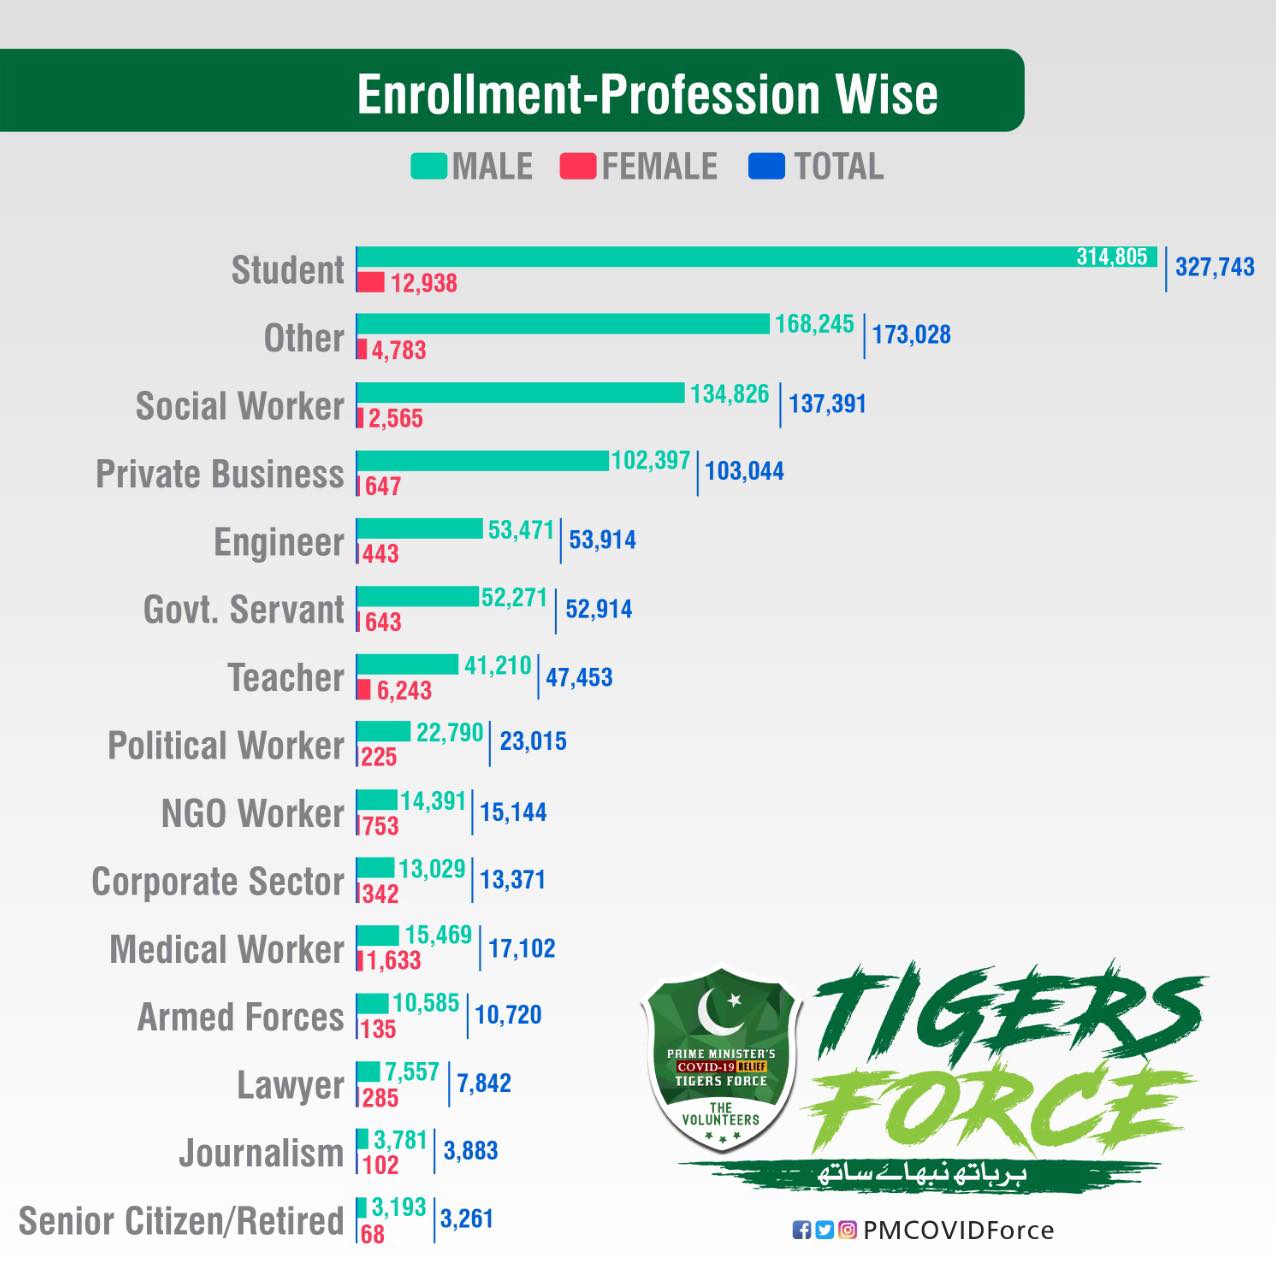 Profession wise